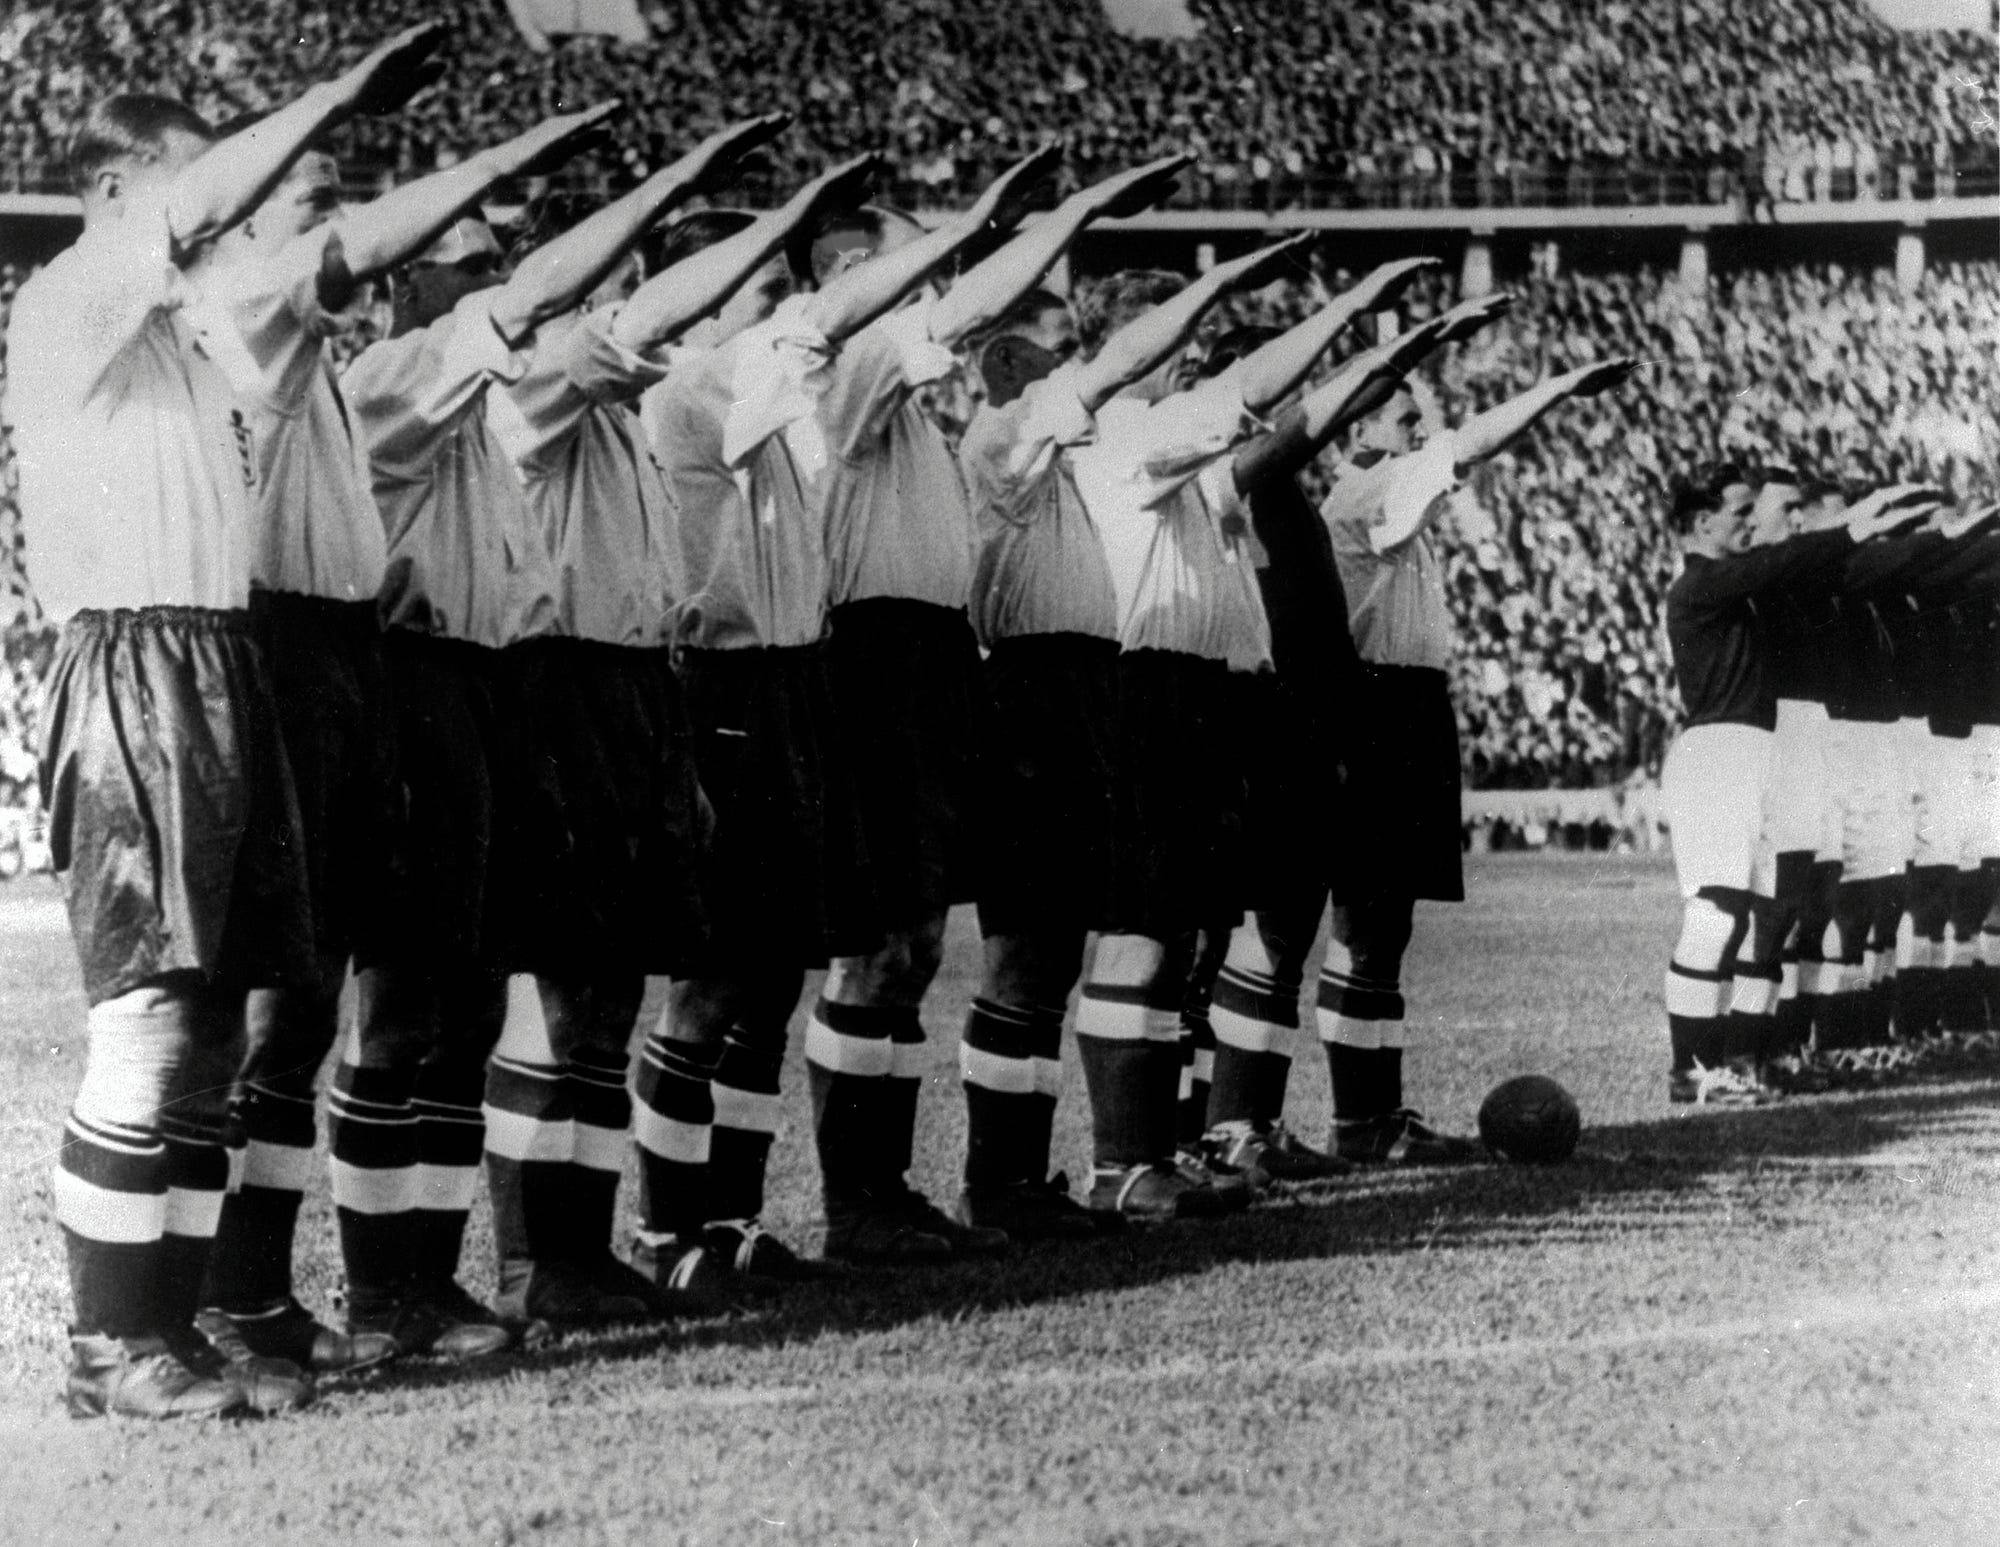 The Entire English Soccer Team Gave The Nazi Salute For